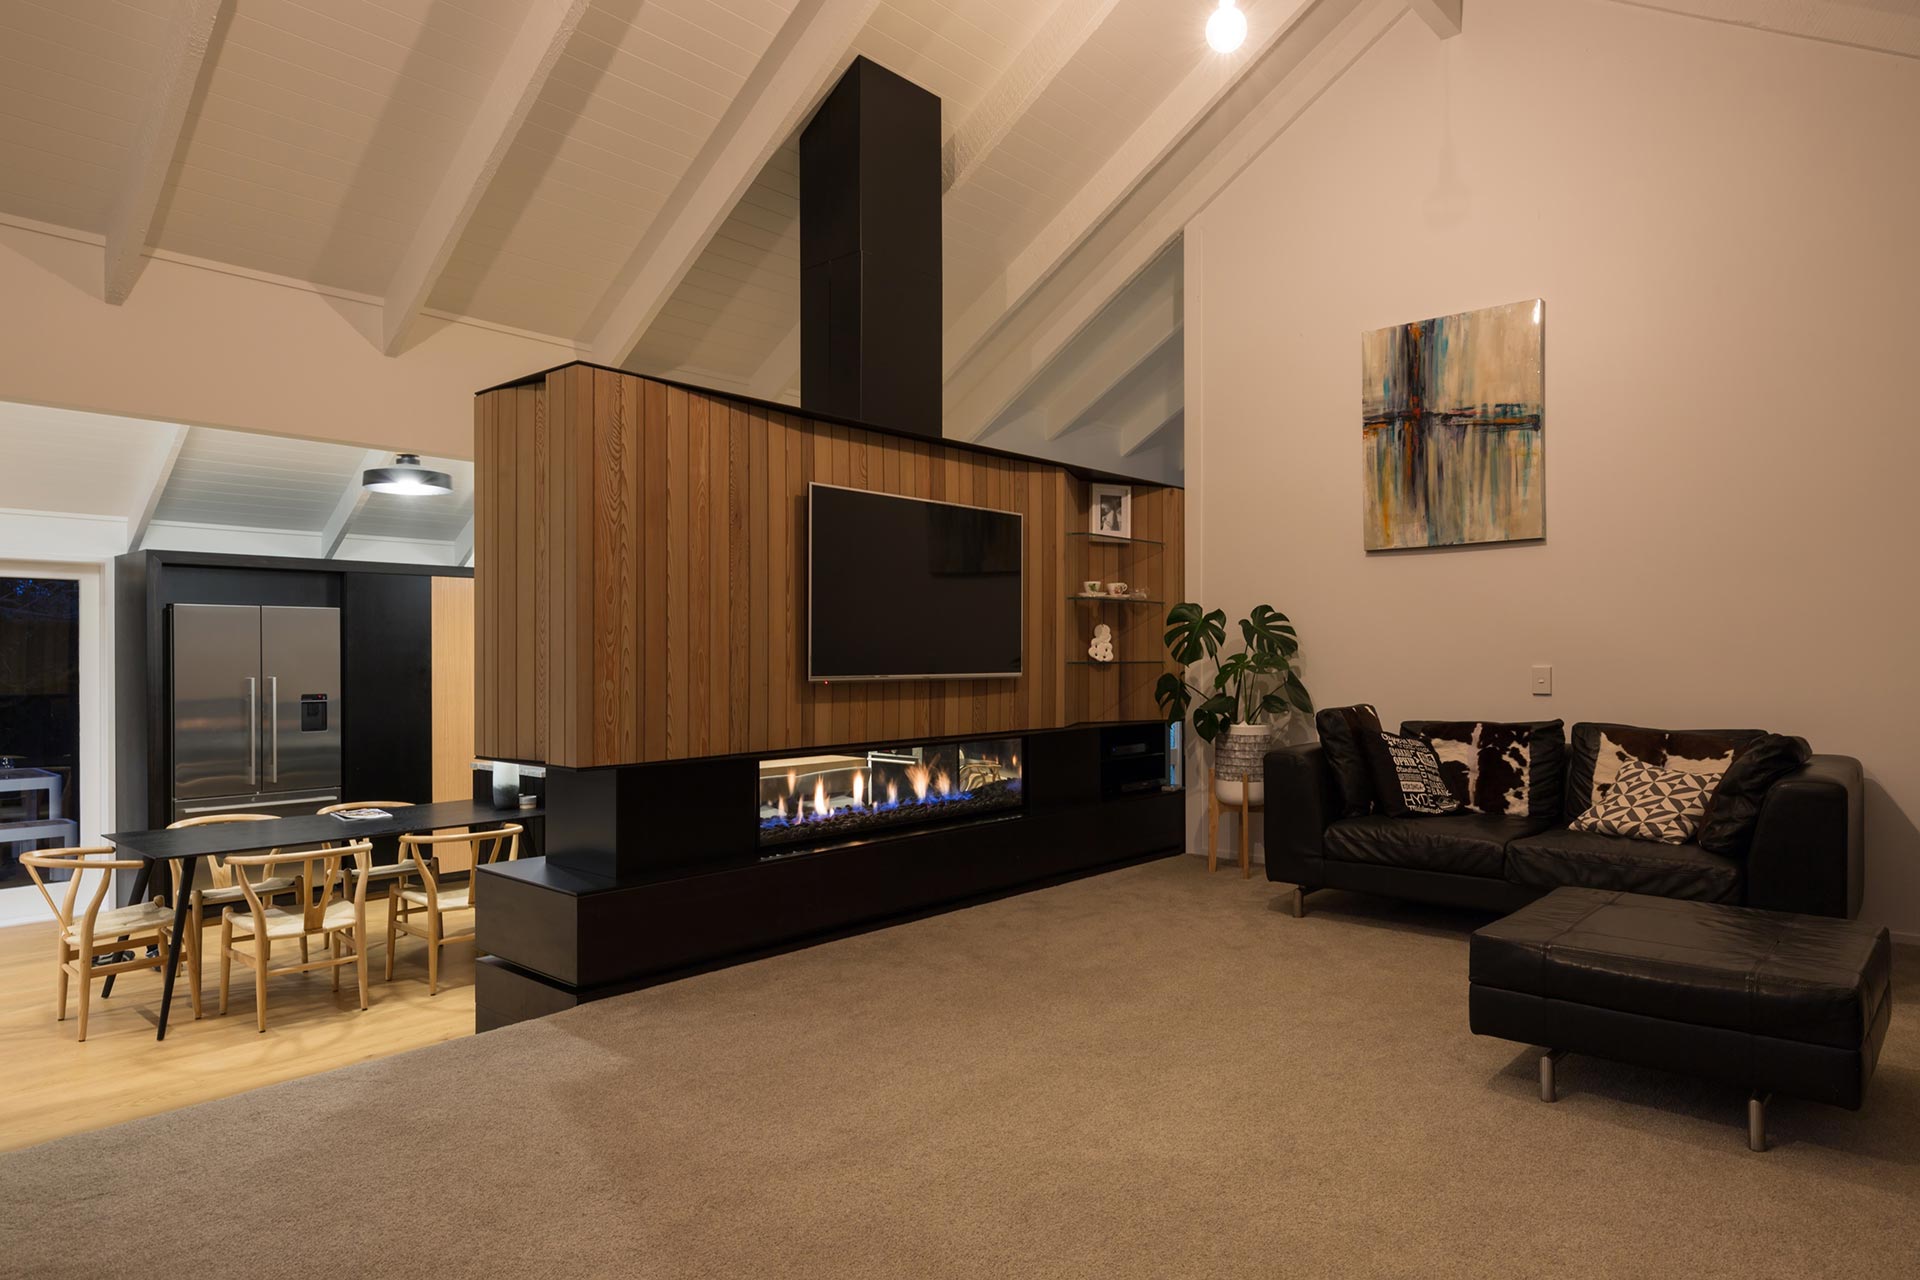 Double Sided Fireplace Makes A Stunning Room Divider